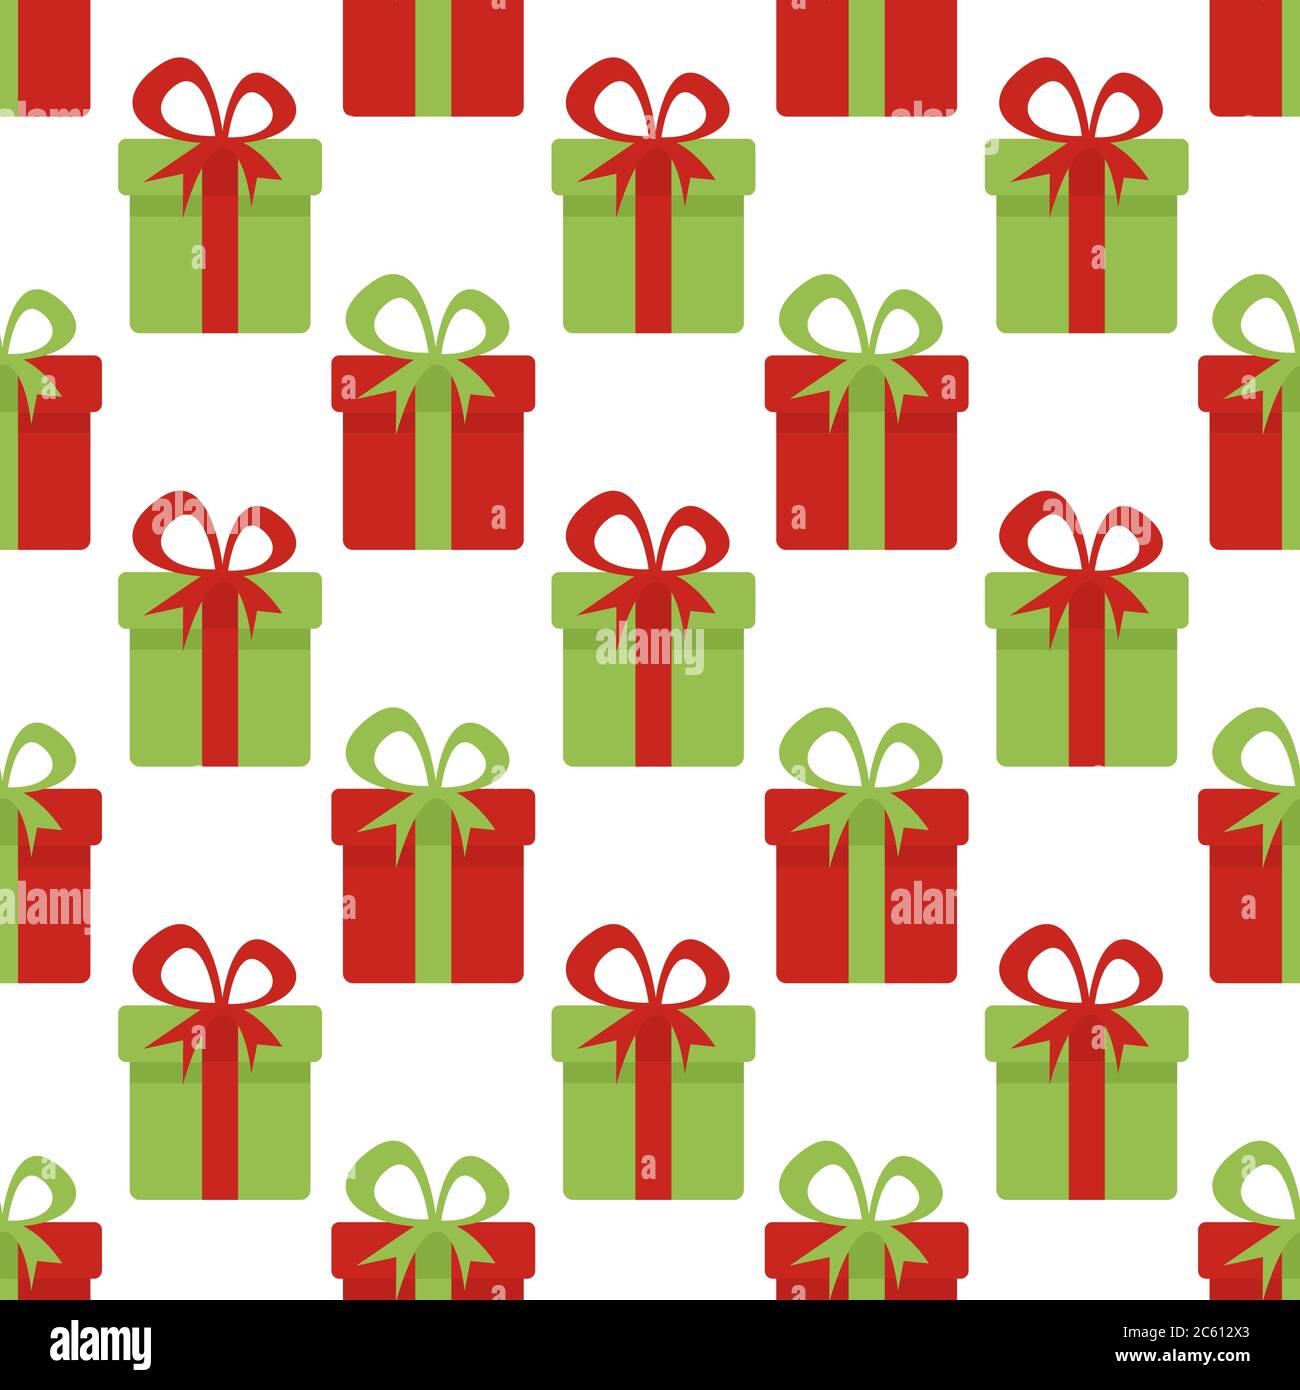 Christmas Seamless pattern with red and green gift boxes. Christmas background. Textures for wallpaper, web page background, wrapping paper. Stock Vector